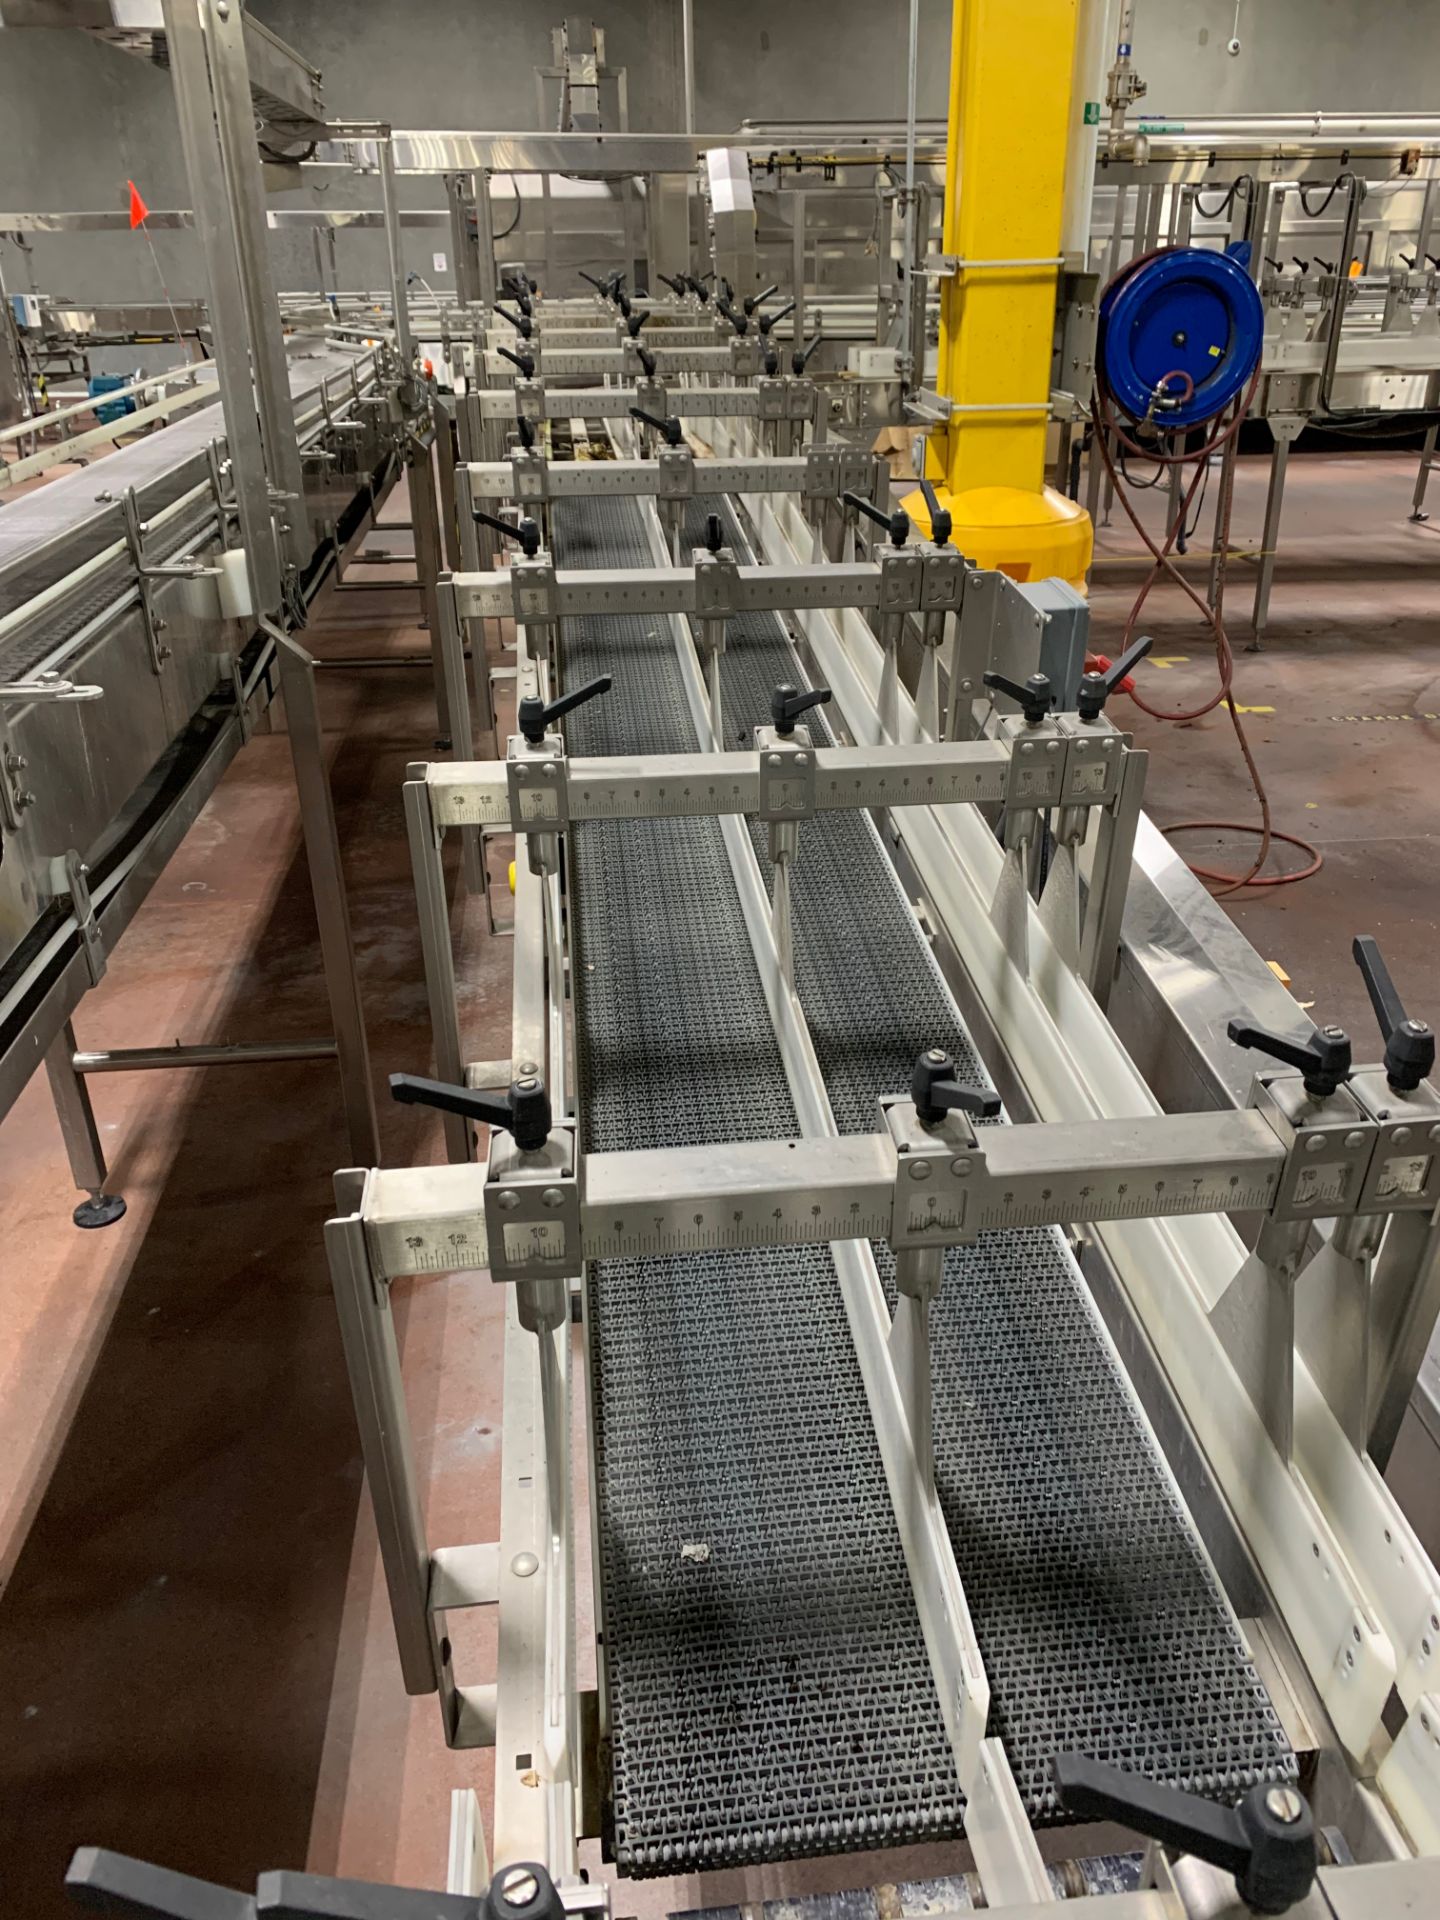 Sentry Carton Conveyor from Divider Switch to Krones Traypacker - Image 10 of 17